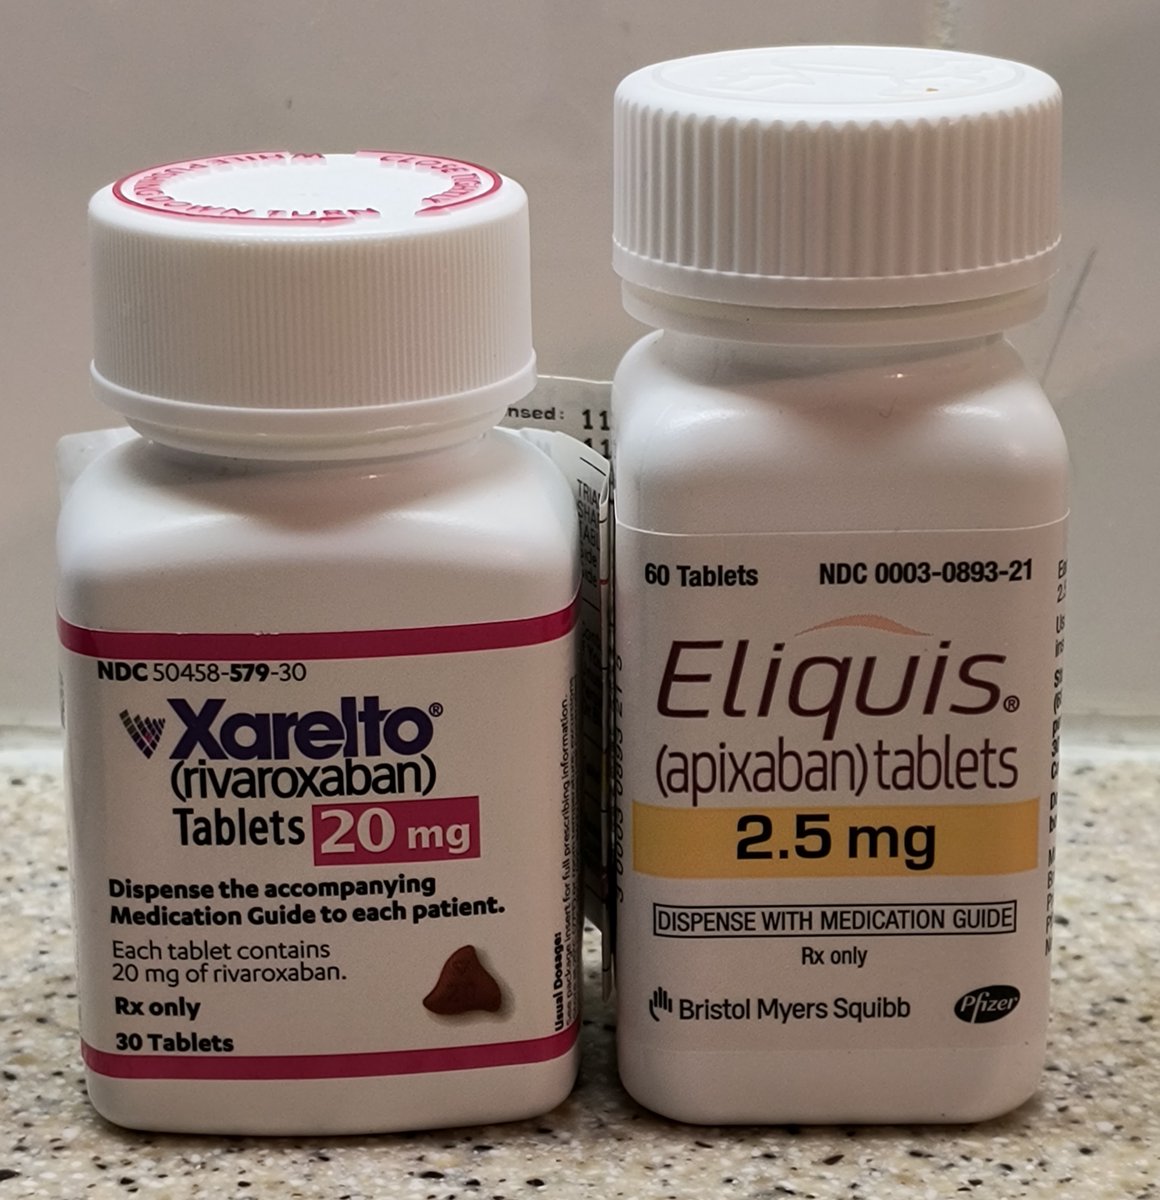 Pharmacy friends:
Do you mind sharing if you typically have a profit or loss filling brand anticoagulants such as Eliquis & Xarelto?
If a loss, do you decline to fill?
Enlighten me please.  Your first-hand experience sincerely appreciated.  
#TwitterRx